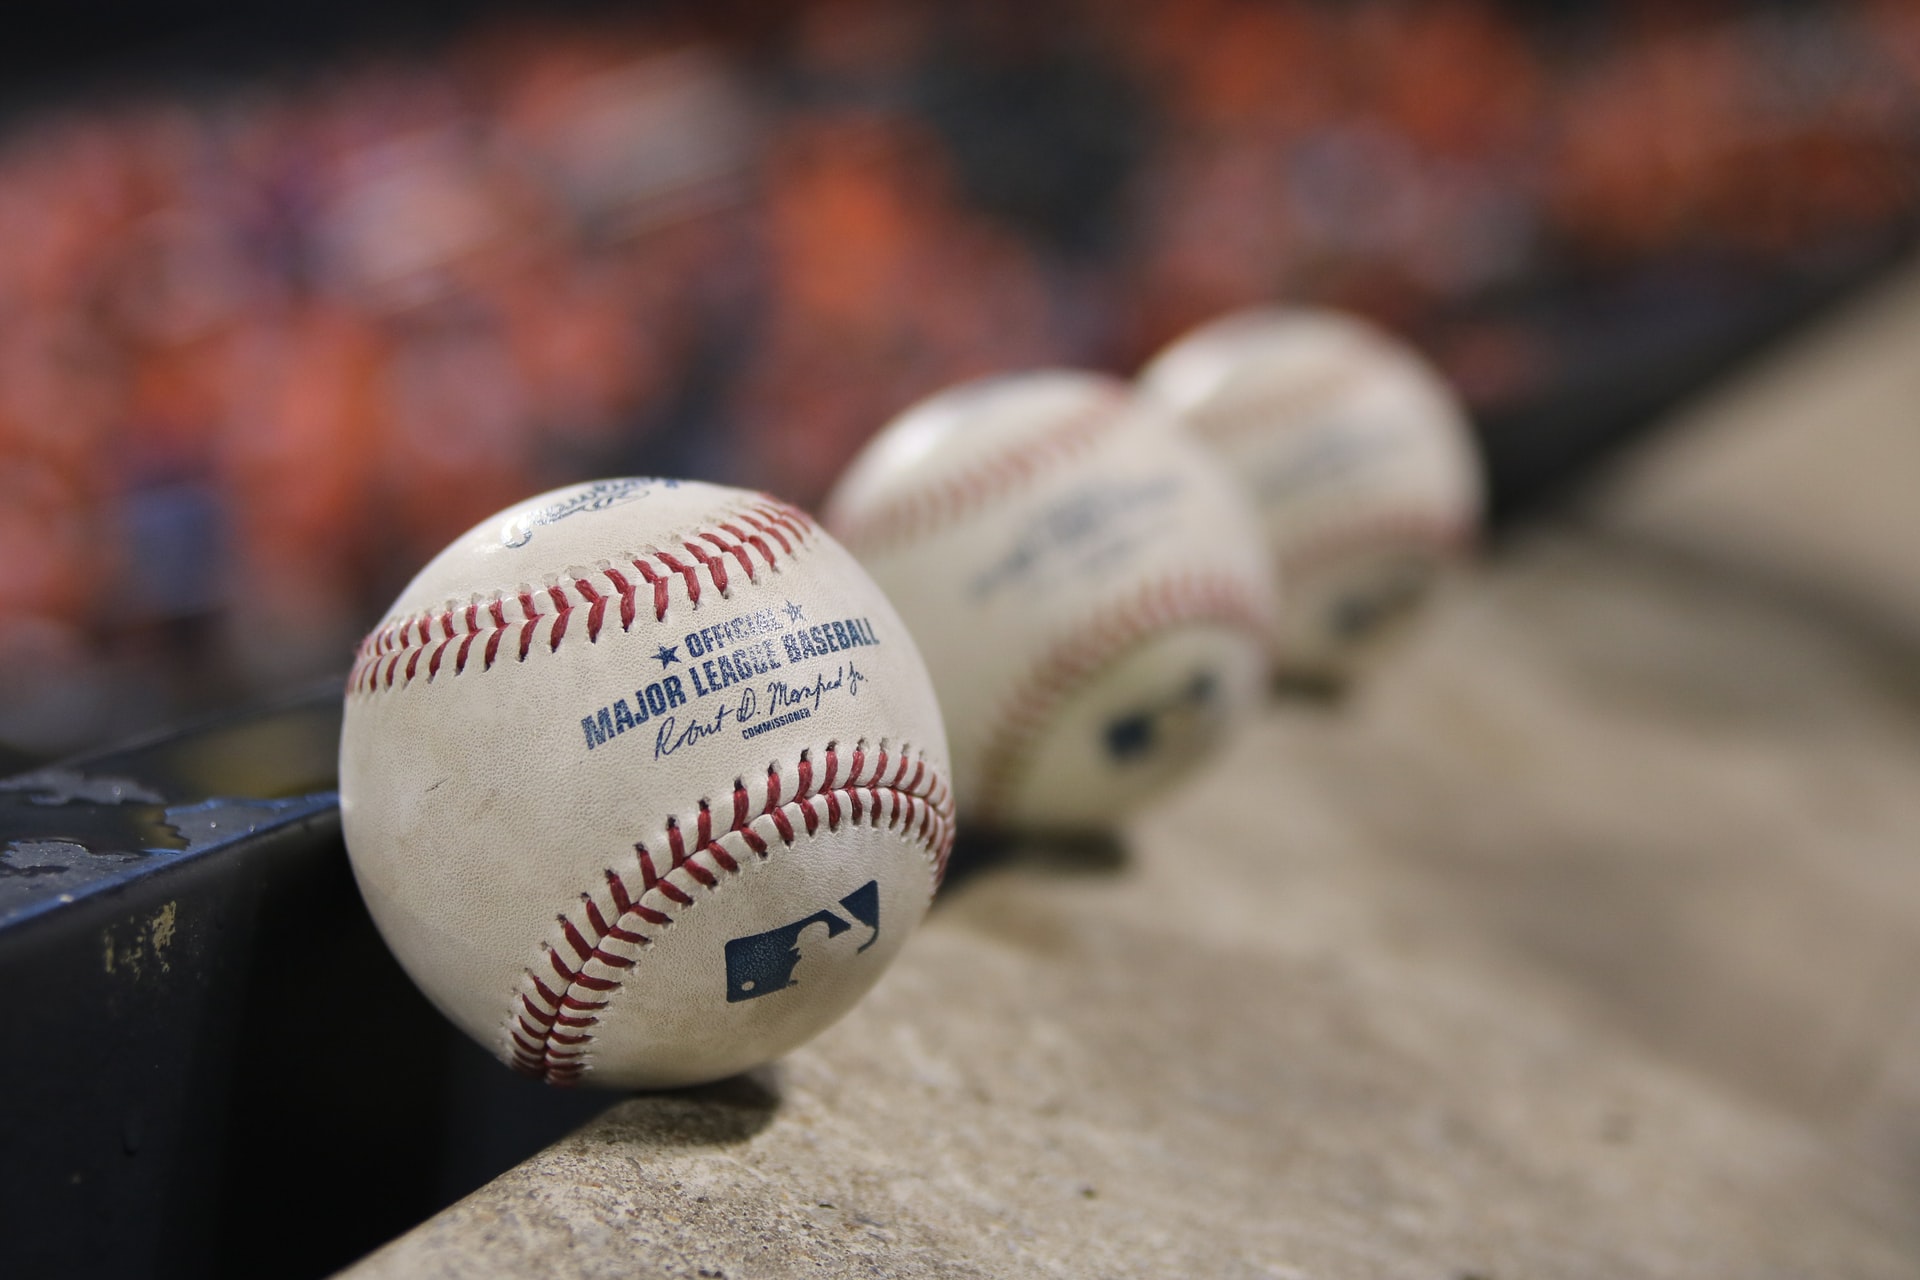 A row of MLB baseballs lined up representing a look ahead to the return of professional sports in light of COVID-19